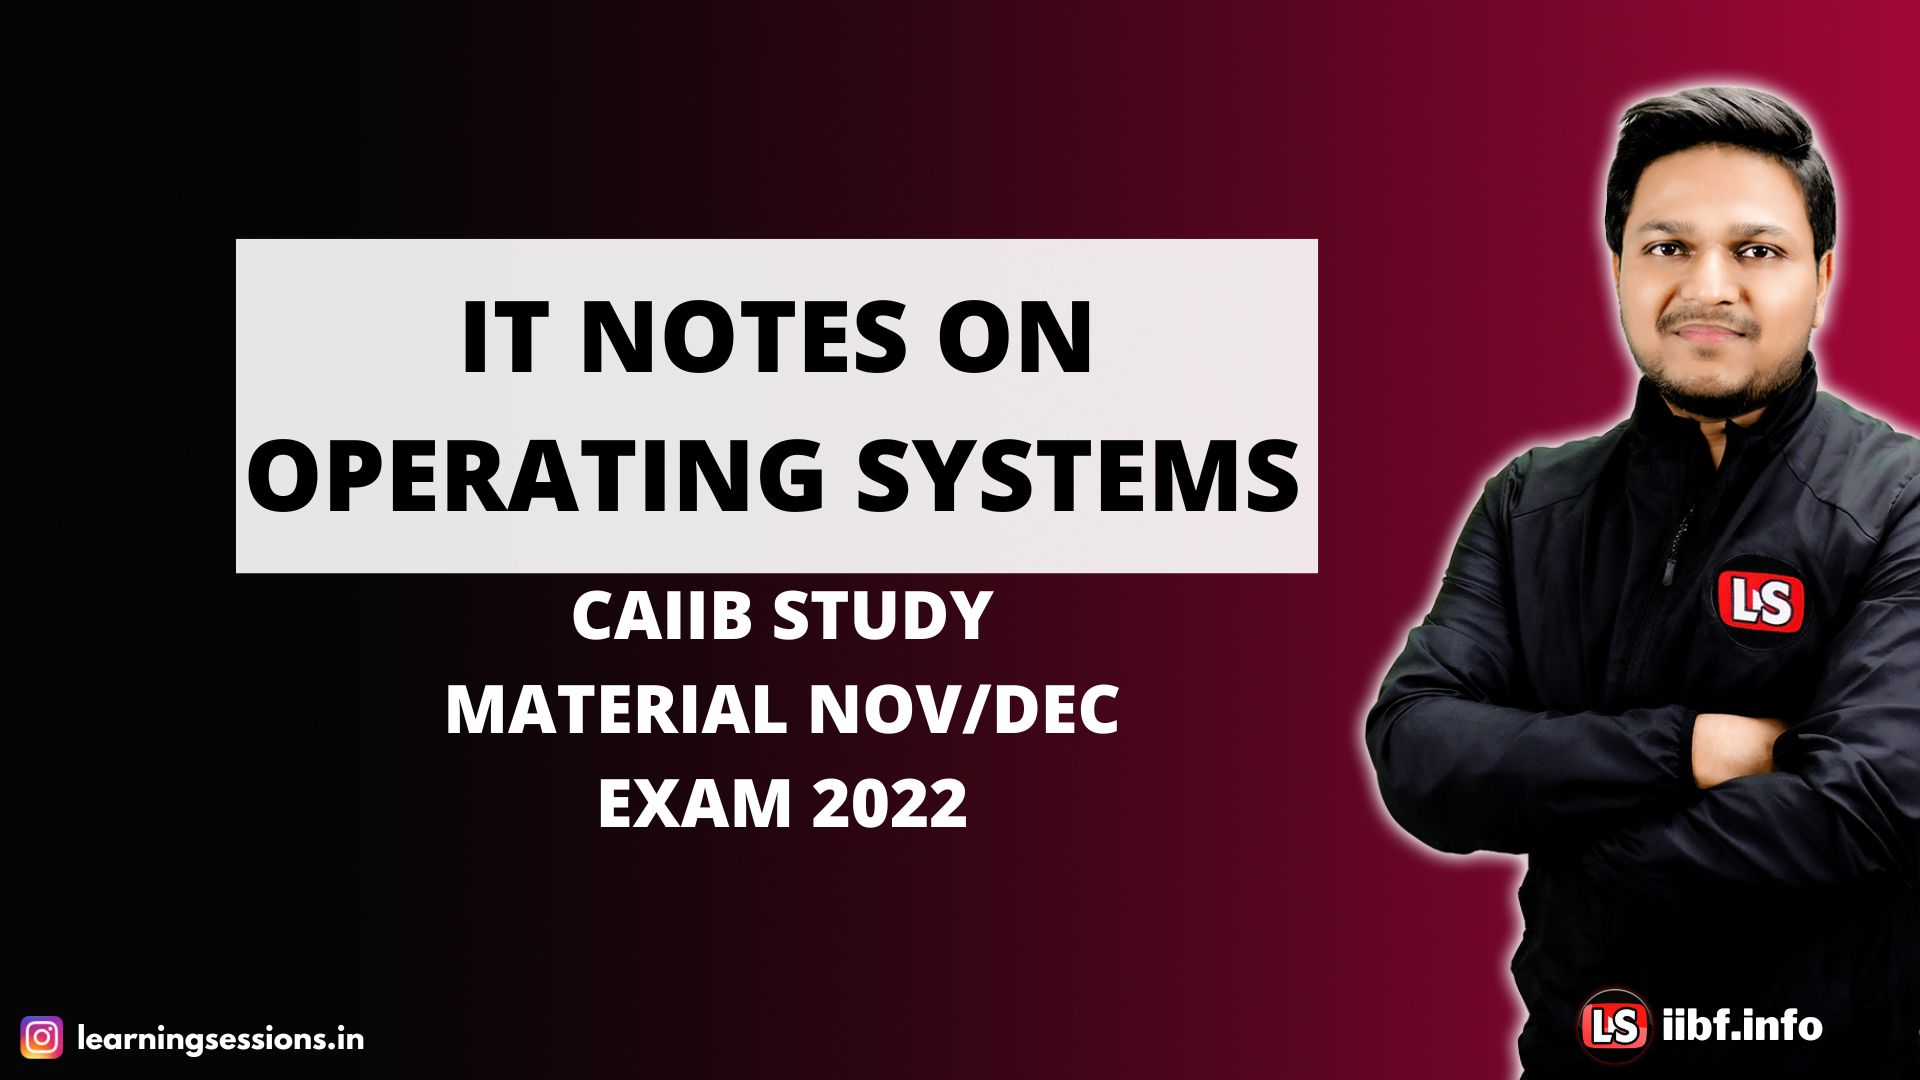 IT SHORT NOTES ON OPERATING SYSTEM | CAIIB SIT STUDY MATERIAL | CAIIB EXAMS 2022